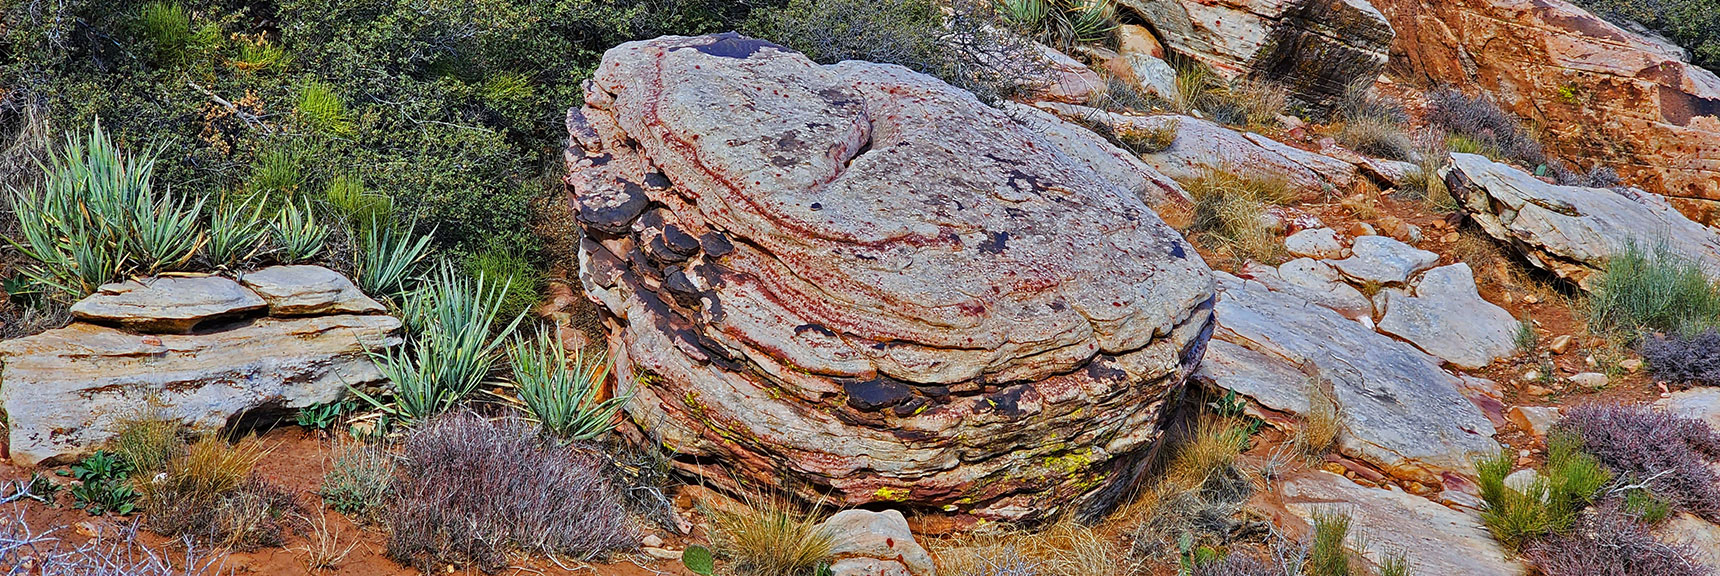 Every Boulder and Ledge is Slowly Etched by the Elements Over Time | Willow Spring Loop, Petroglyph Canyon, Lost Creek Canyon | Red Rock Canyon National Conservation Area, Nevada